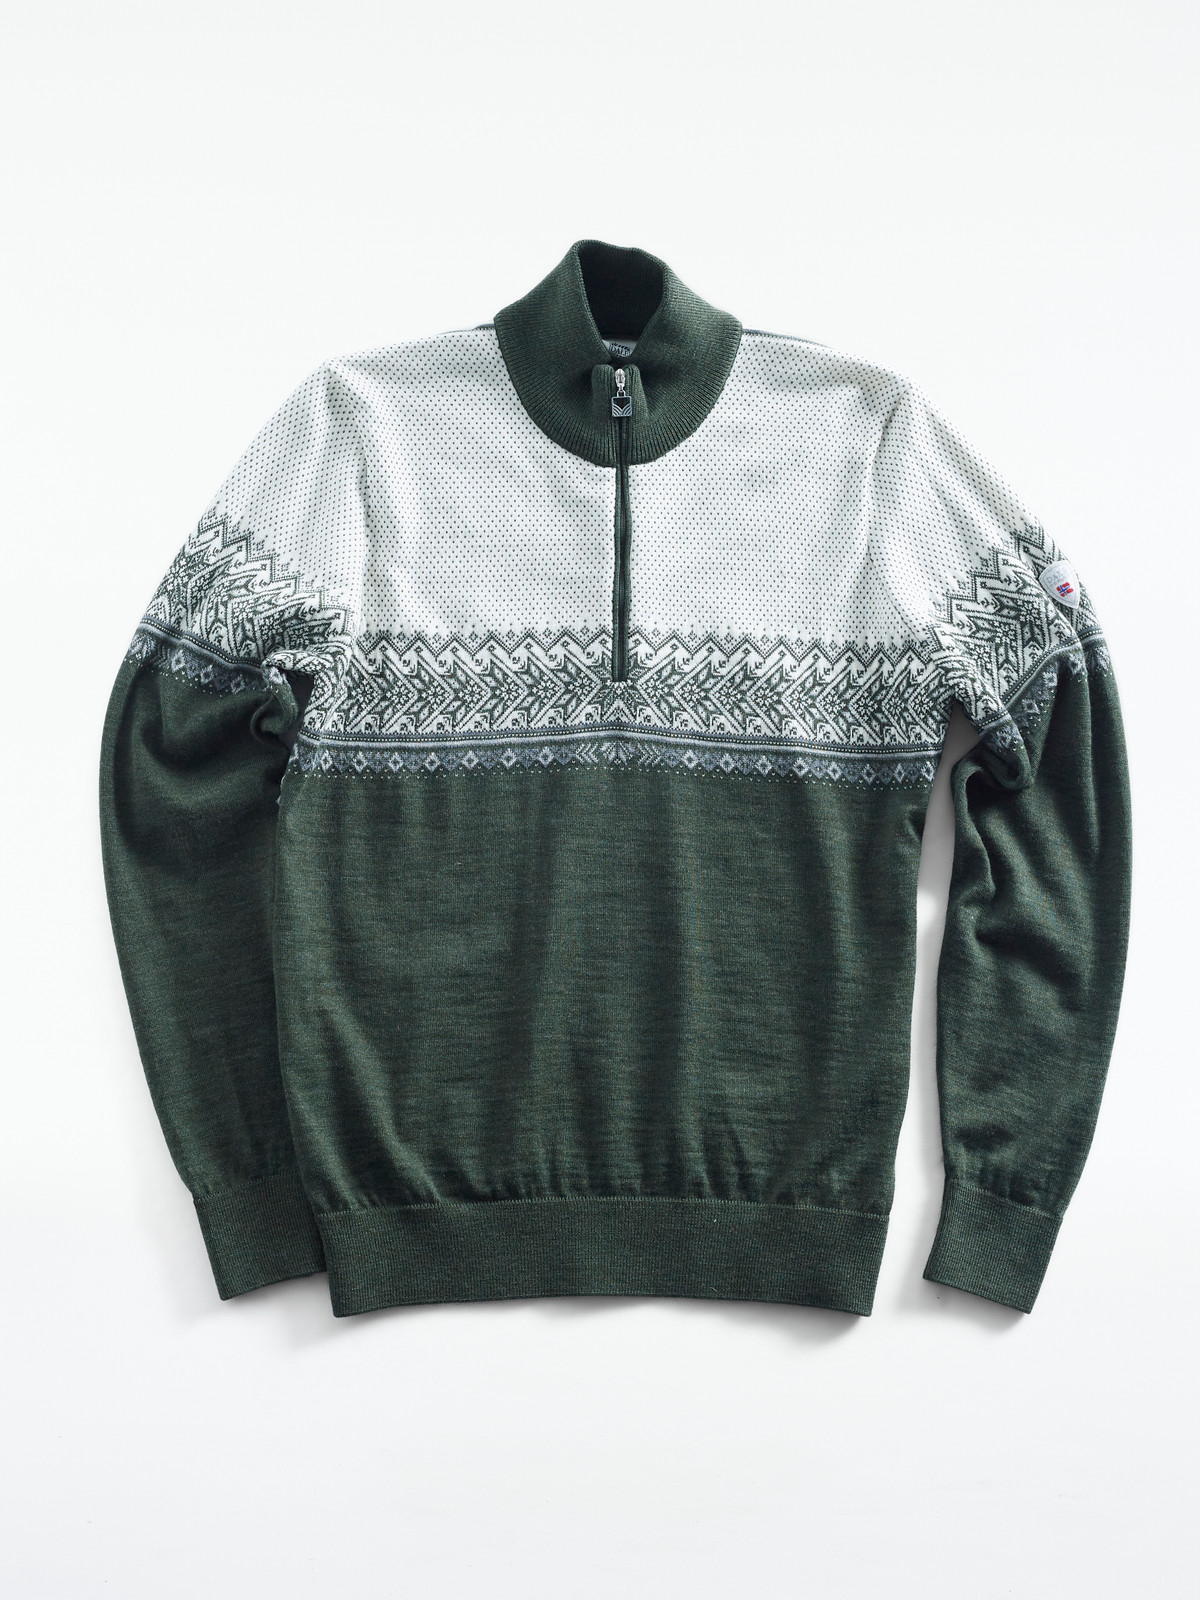 Dale of Norway Hovden Sweater, Mens -  Dark Green/Light Charcoal/Off White,93441-N